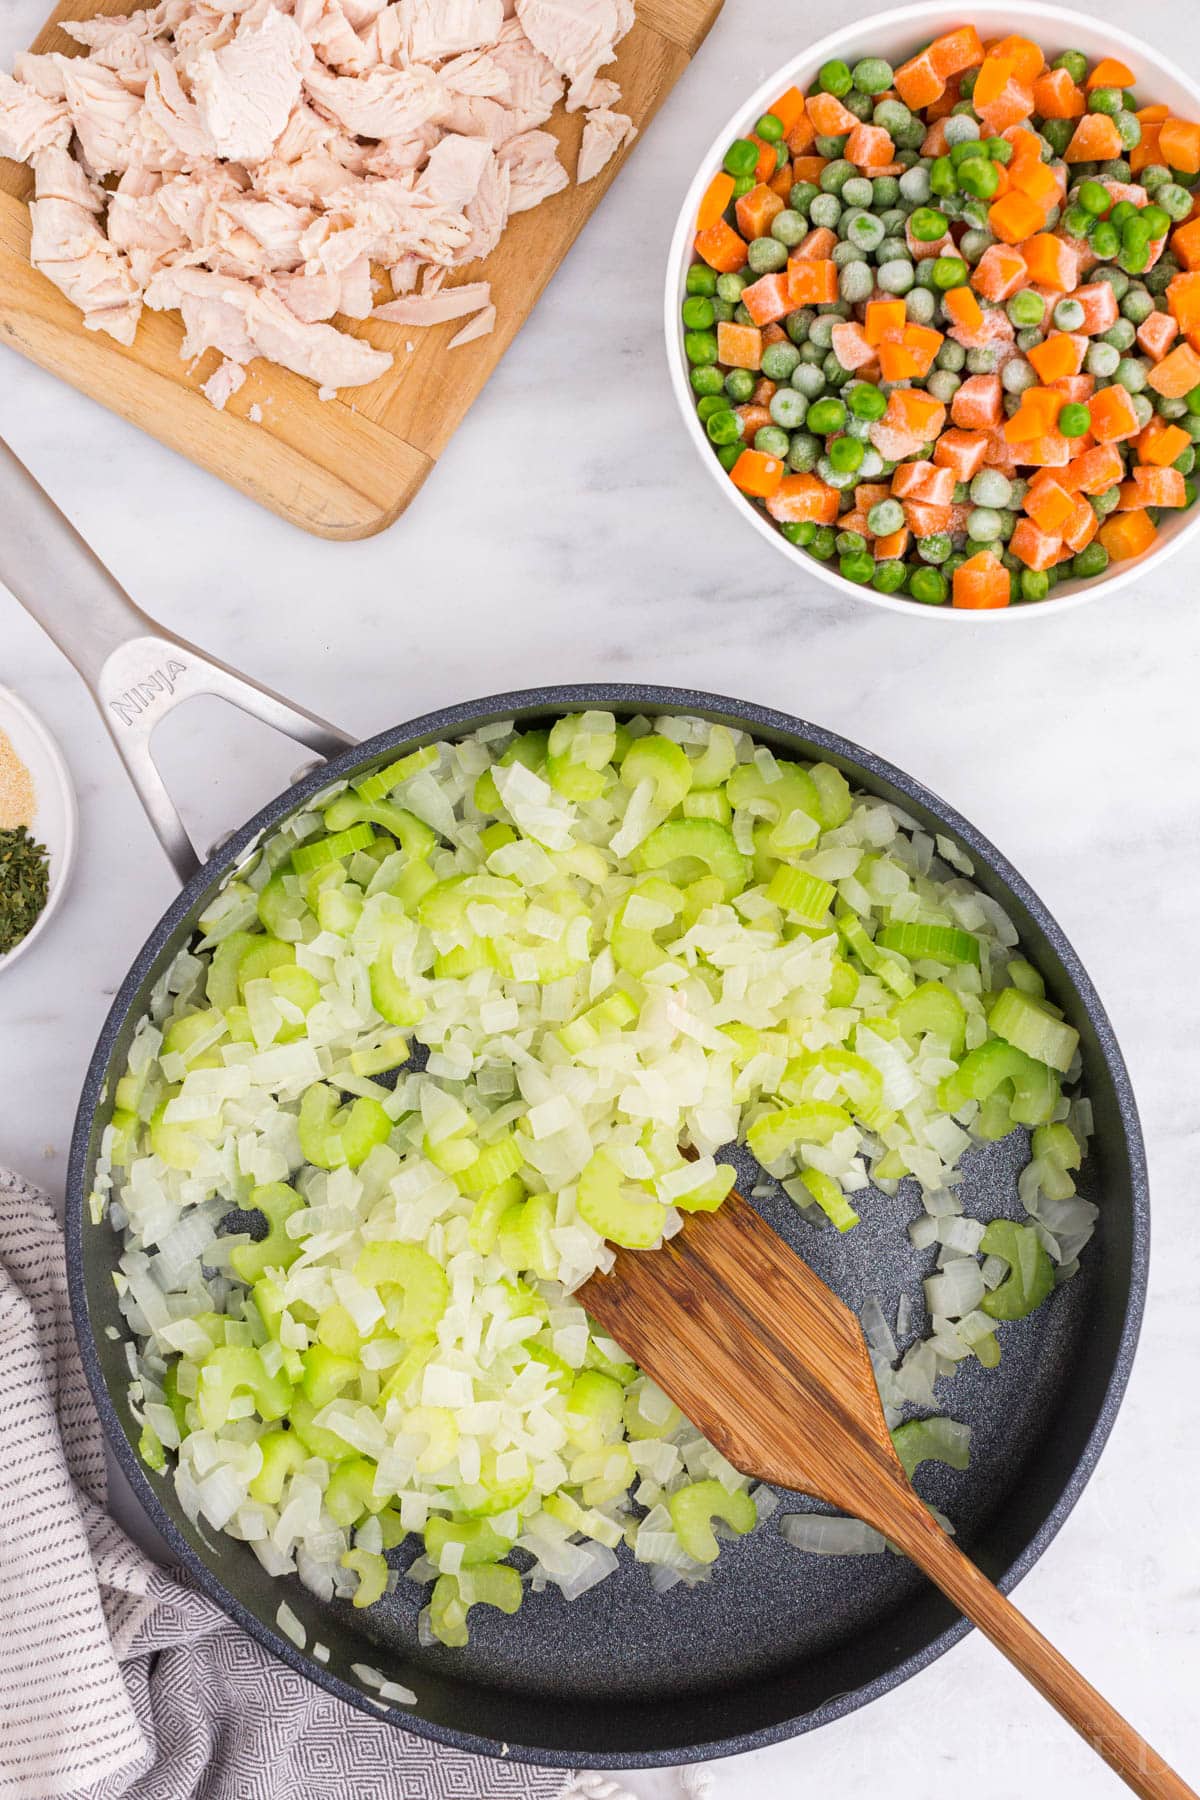 Heated skillet with melted butter, onions, and celery, diced cooked chicken on a wooden kitchen board, bowl of frozen peas and carrots.